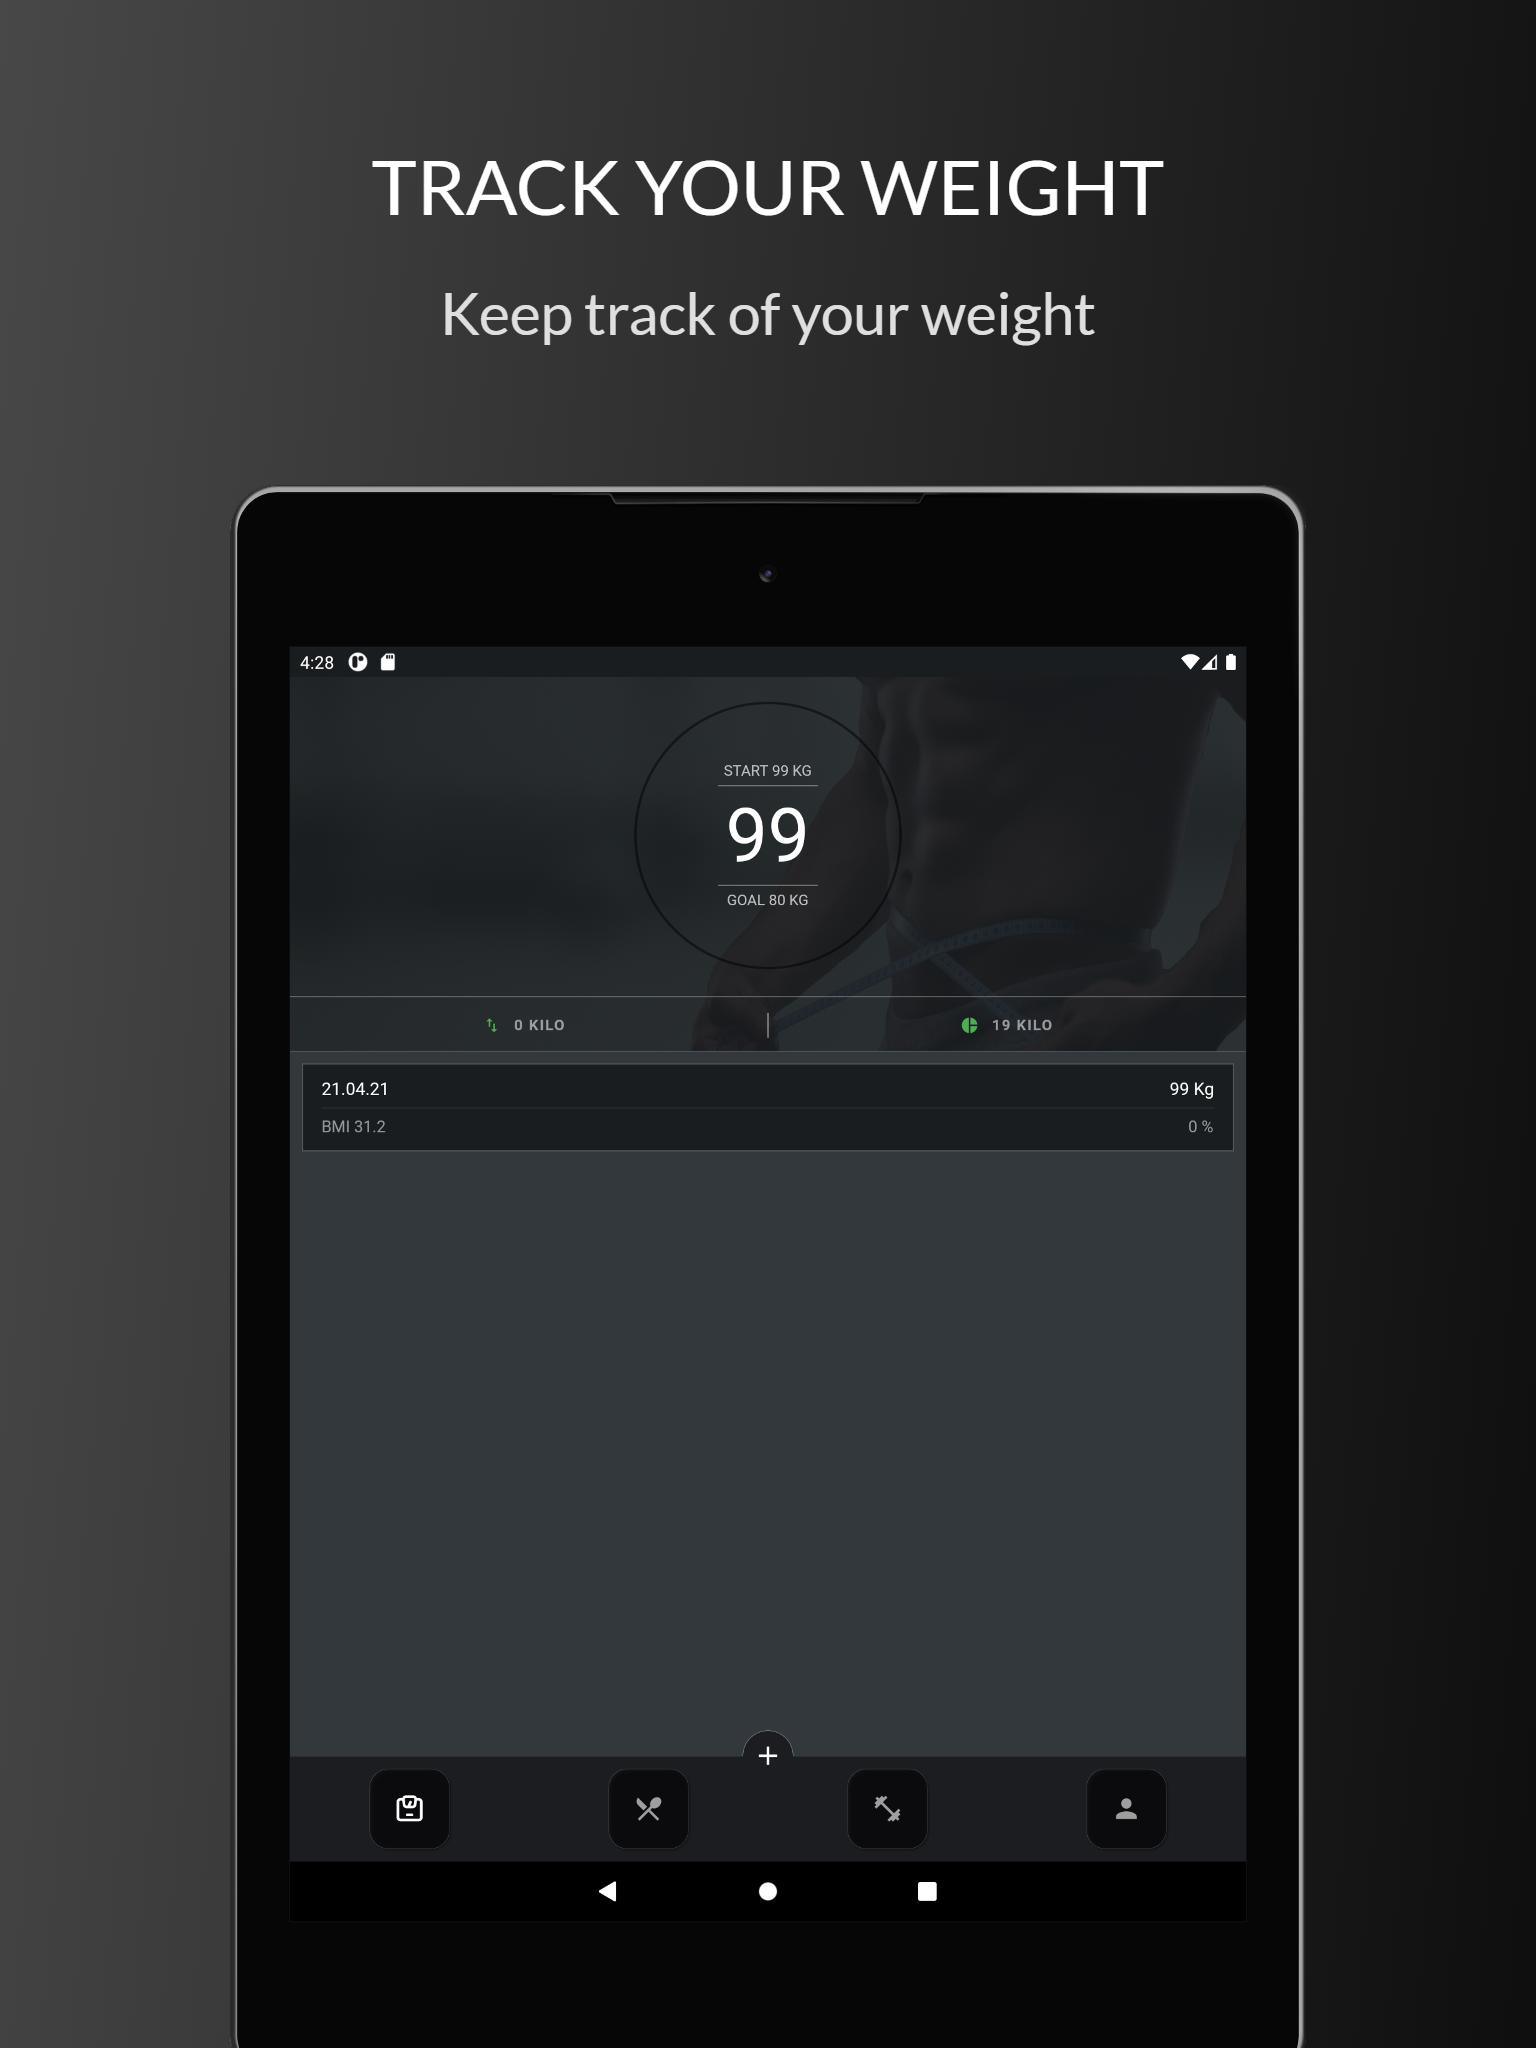 All in One Fitness - Weight Loss, Workouts & More 1.2.2 Screenshot 12